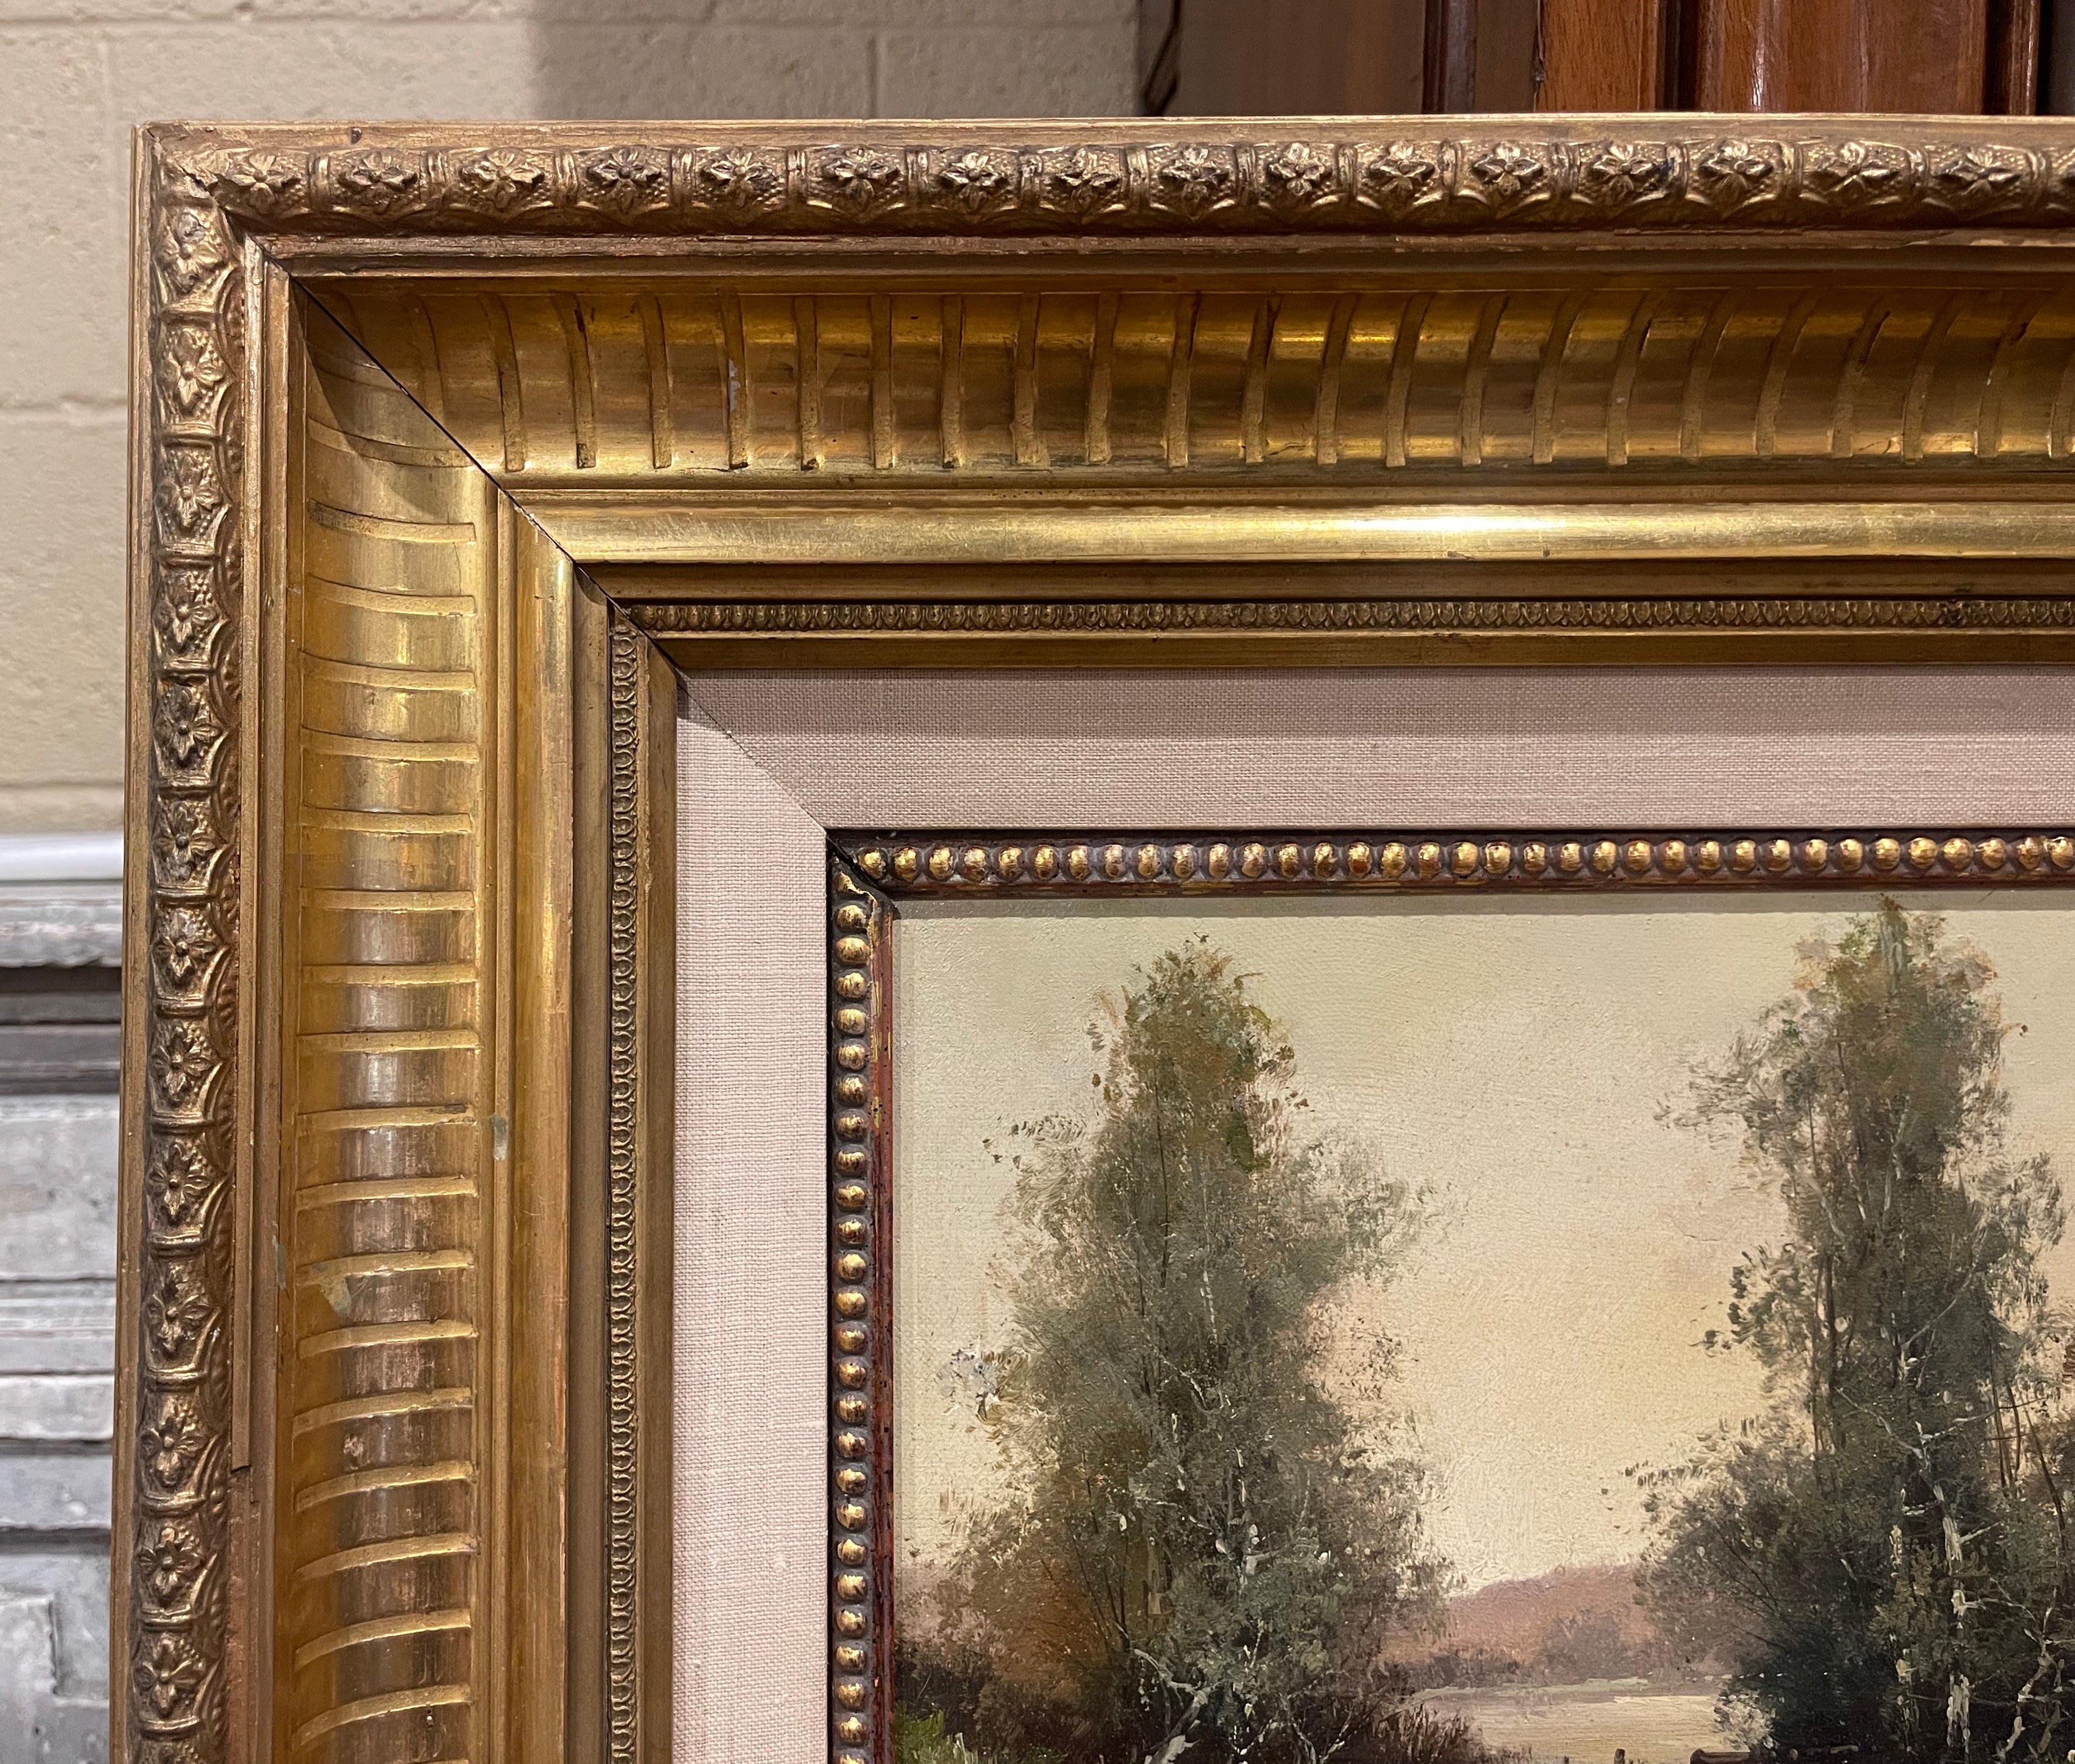 19th Century Framed Landscape Oil Painting Signed L. Dupuy for E. Galien-Laloue In Excellent Condition For Sale In Dallas, TX